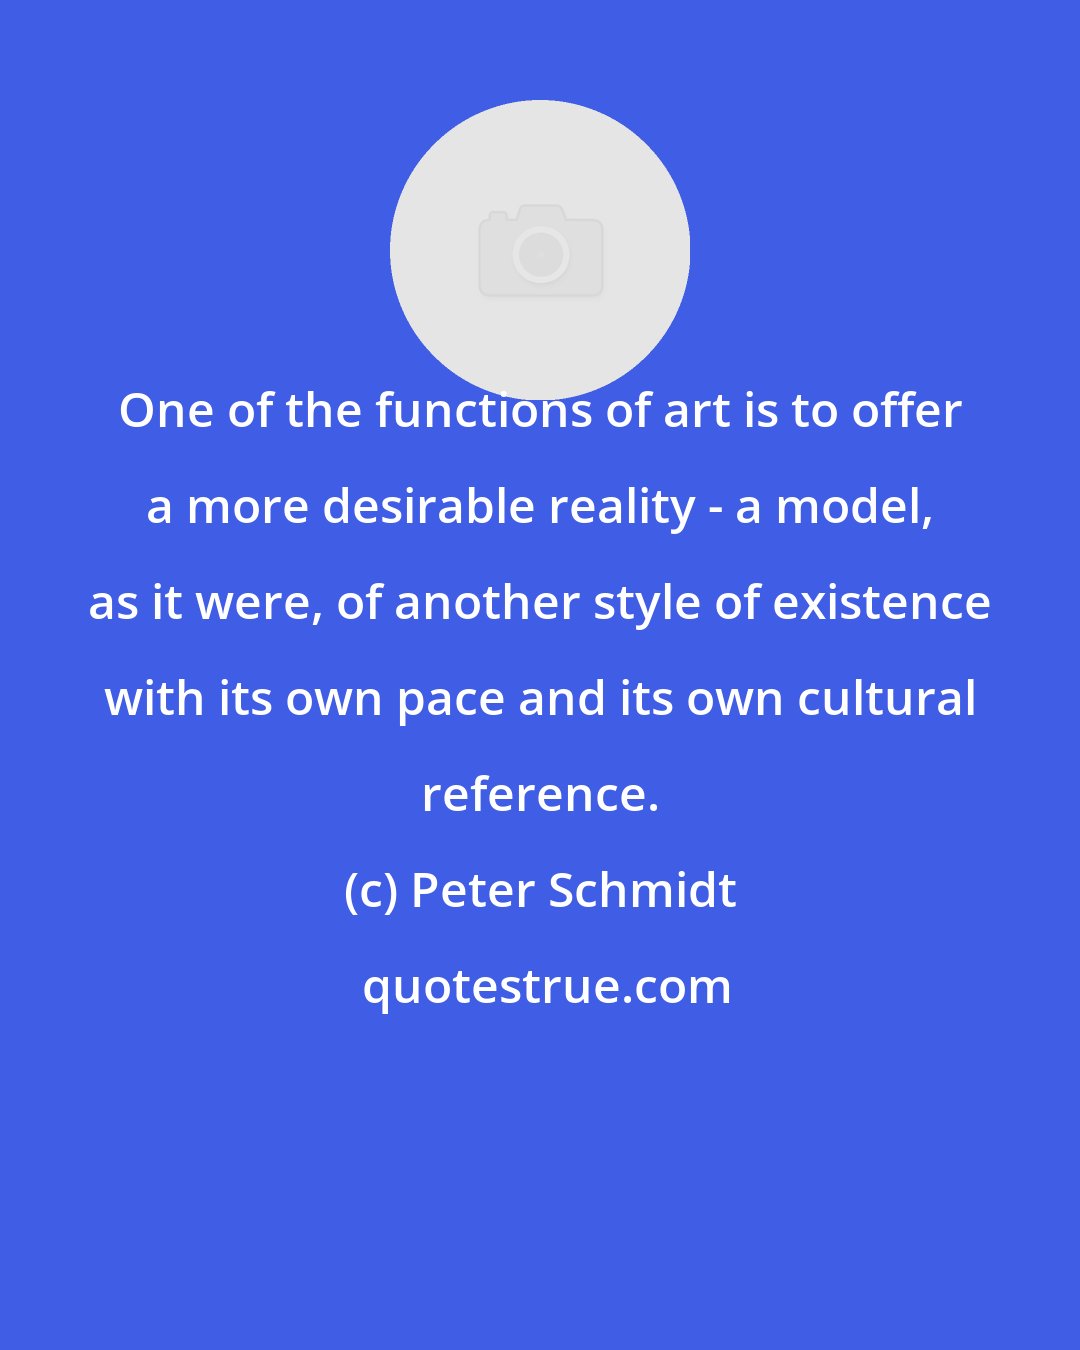 Peter Schmidt: One of the functions of art is to offer a more desirable reality - a model, as it were, of another style of existence with its own pace and its own cultural reference.